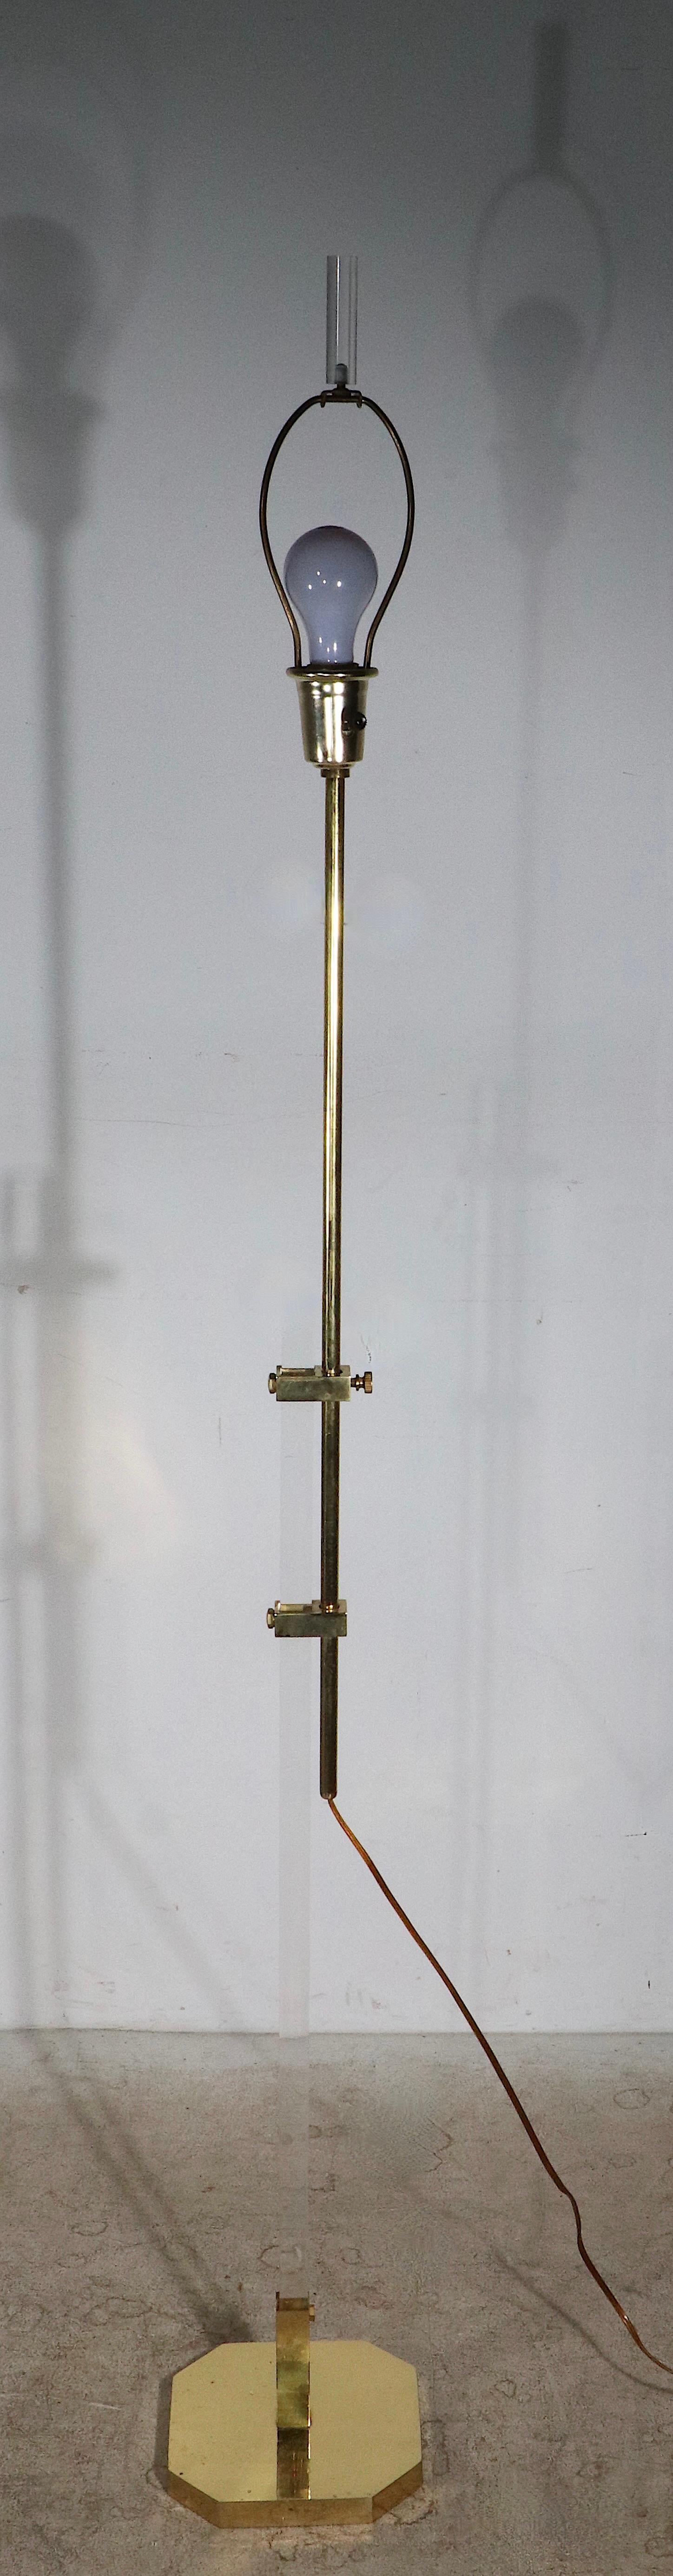 Chic adjustable floor lamp of lucite and brass. The lamp features a rectangular vertical shaft of solid transparent lucite on a six sided brass base, which is coupled with an adjustable tubular brass vertical shaft. The lamp is in very good,